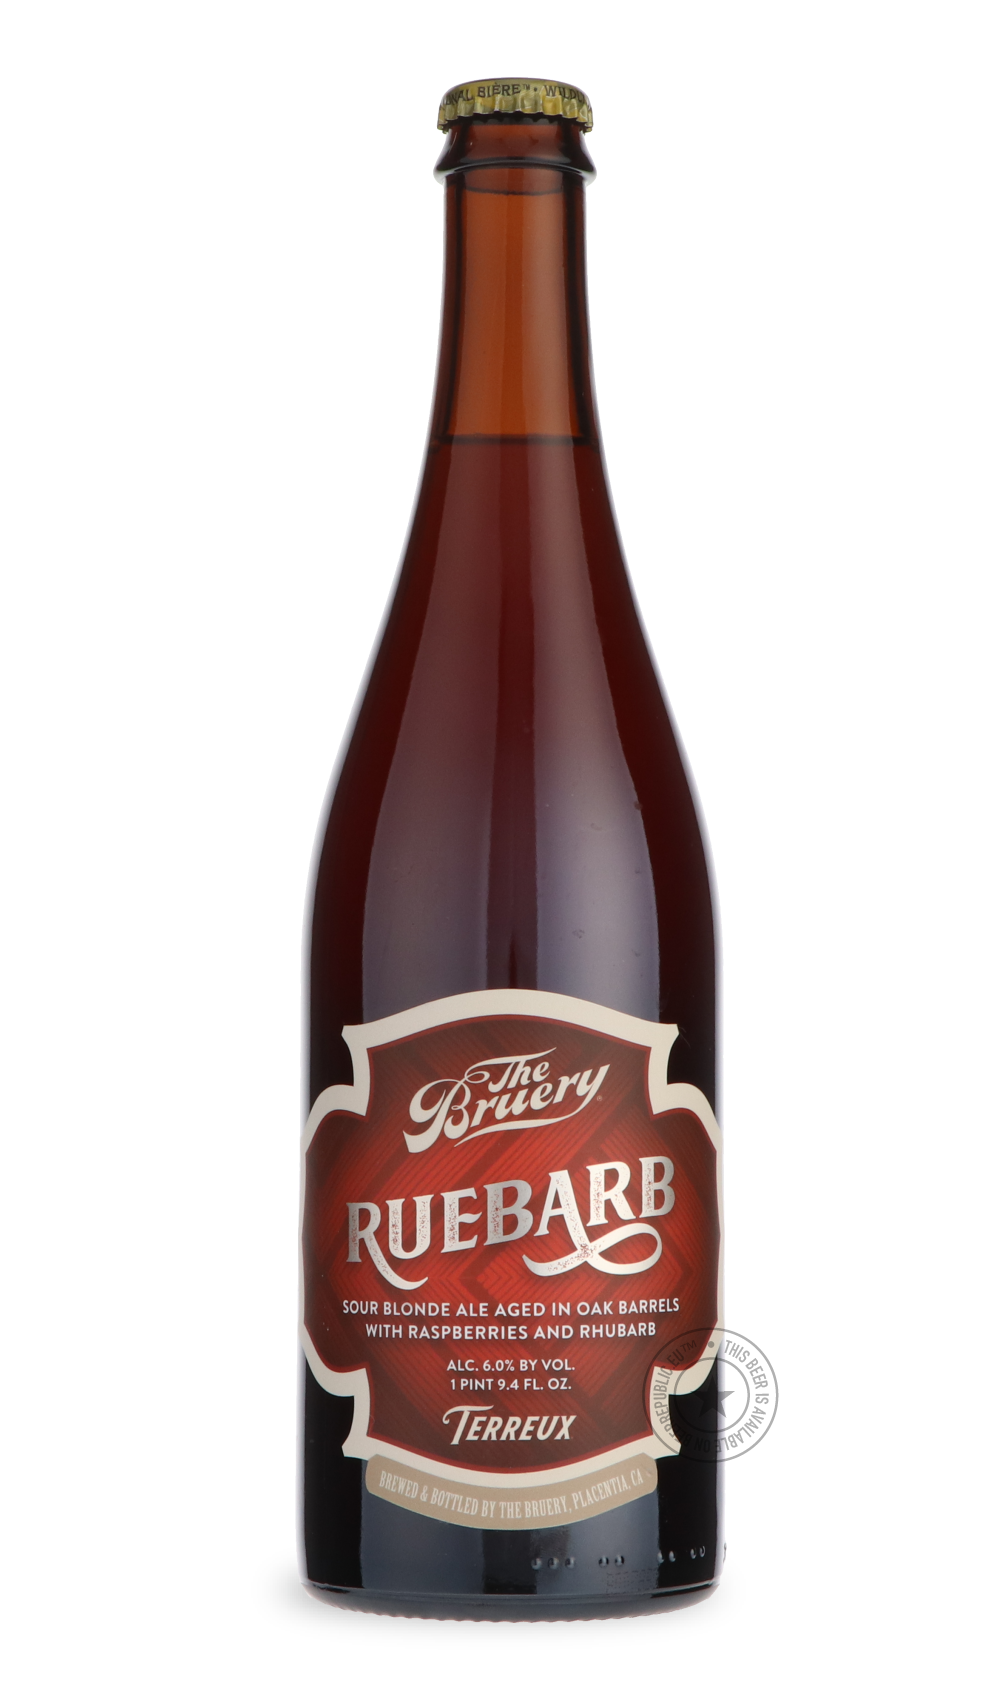 -The Bruery- Terreux Ruebarb-Sour / Wild & Fruity- Only @ Beer Republic - The best online beer store for American & Canadian craft beer - Buy beer online from the USA and Canada - Bier online kopen - Amerikaans bier kopen - Craft beer store - Craft beer kopen - Amerikanisch bier kaufen - Bier online kaufen - Acheter biere online - IPA - Stout - Porter - New England IPA - Hazy IPA - Imperial Stout - Barrel Aged - Barrel Aged Imperial Stout - Brown - Dark beer - Blond - Blonde - Pilsner - Lager - Wheat - Weiz